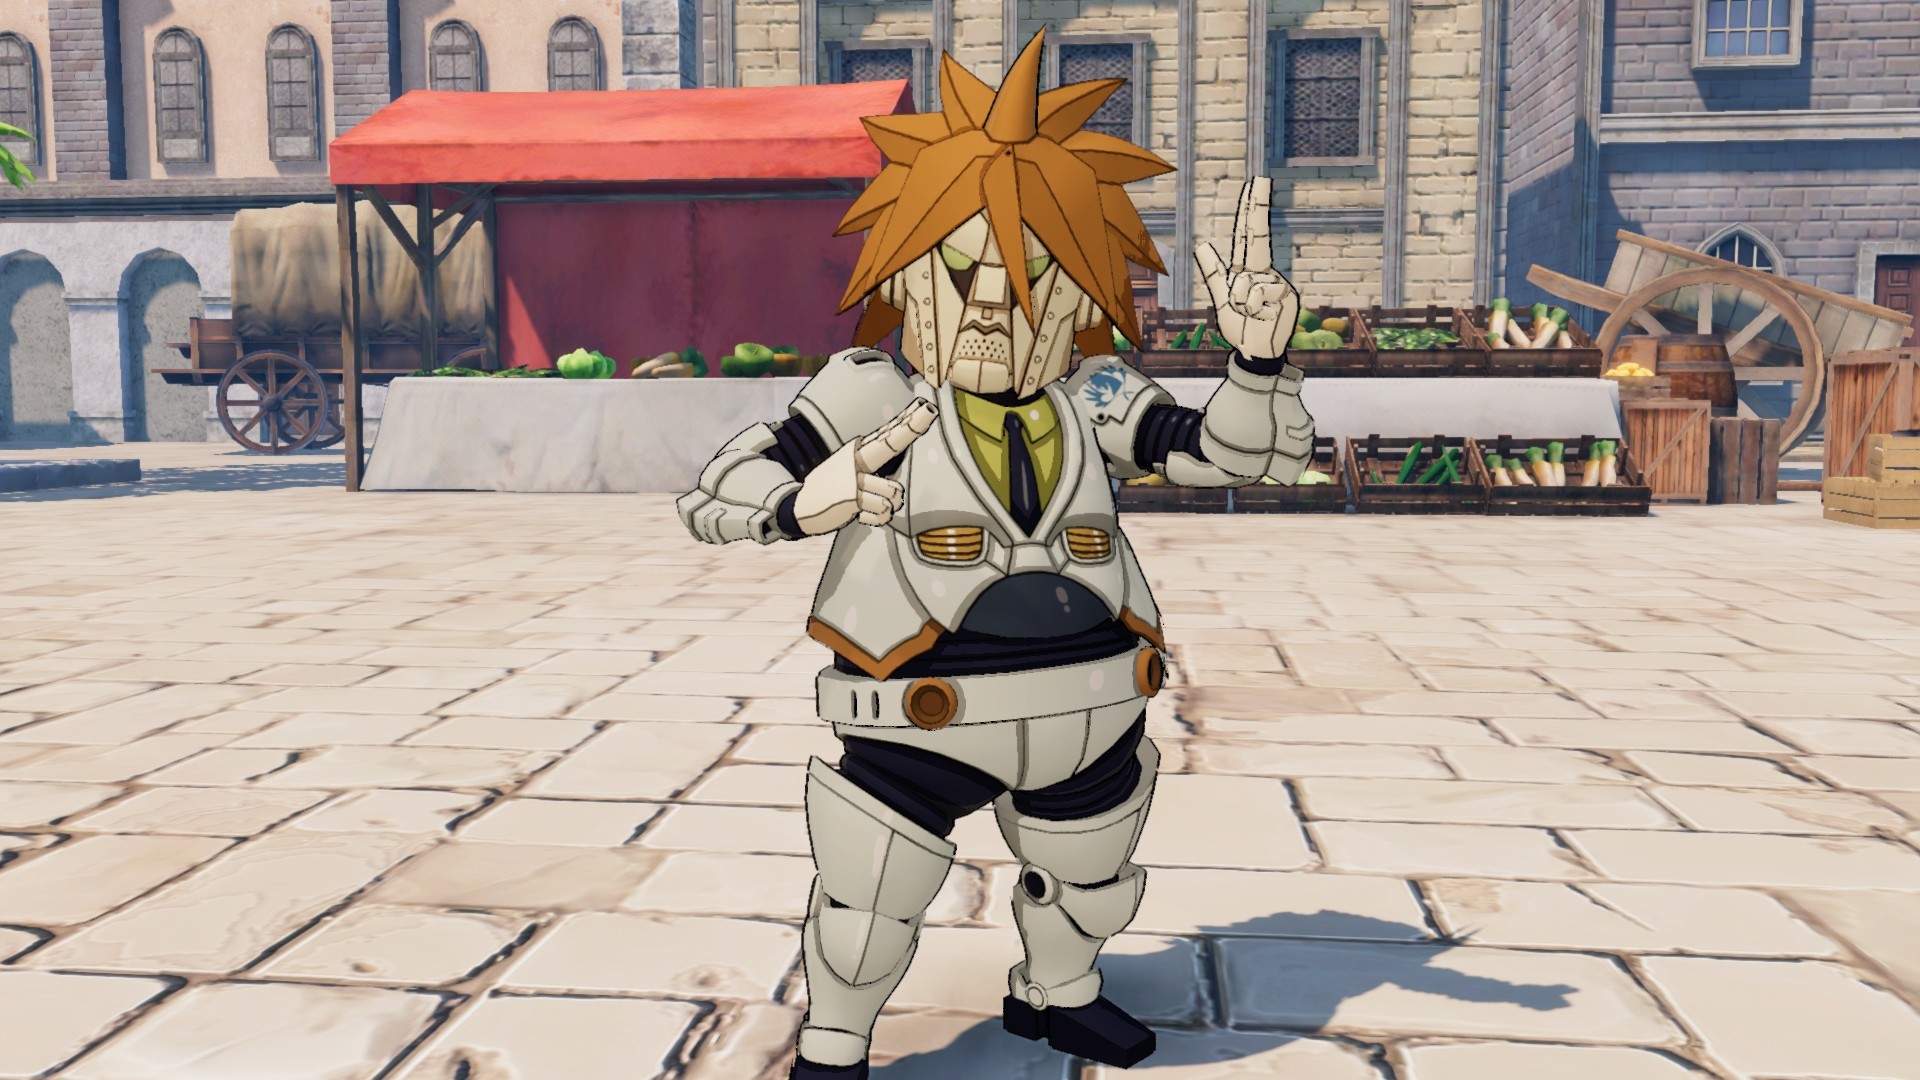 FAIRY TAIL: Dress-Up Costume Set for 16 Playable Characters screenshot